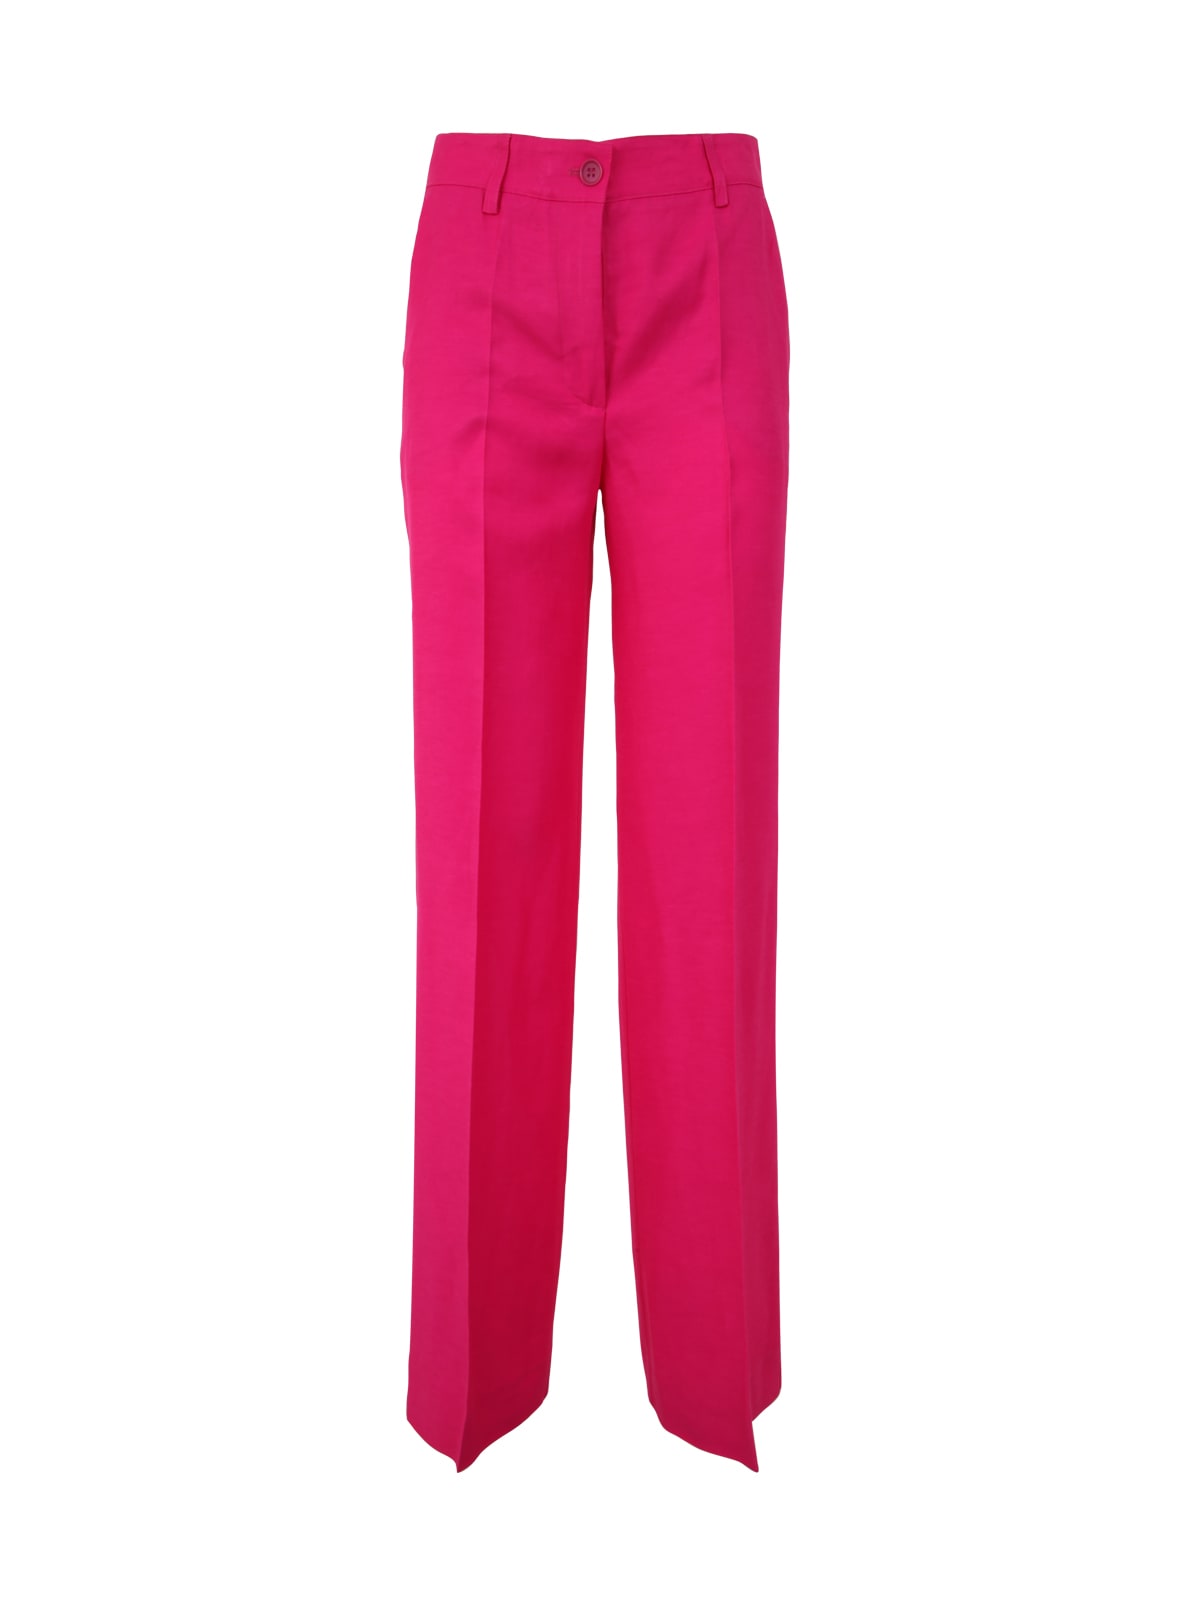 P.A.R.O.S.H SATIN, VISCOSE AND LINEN TROUSERS